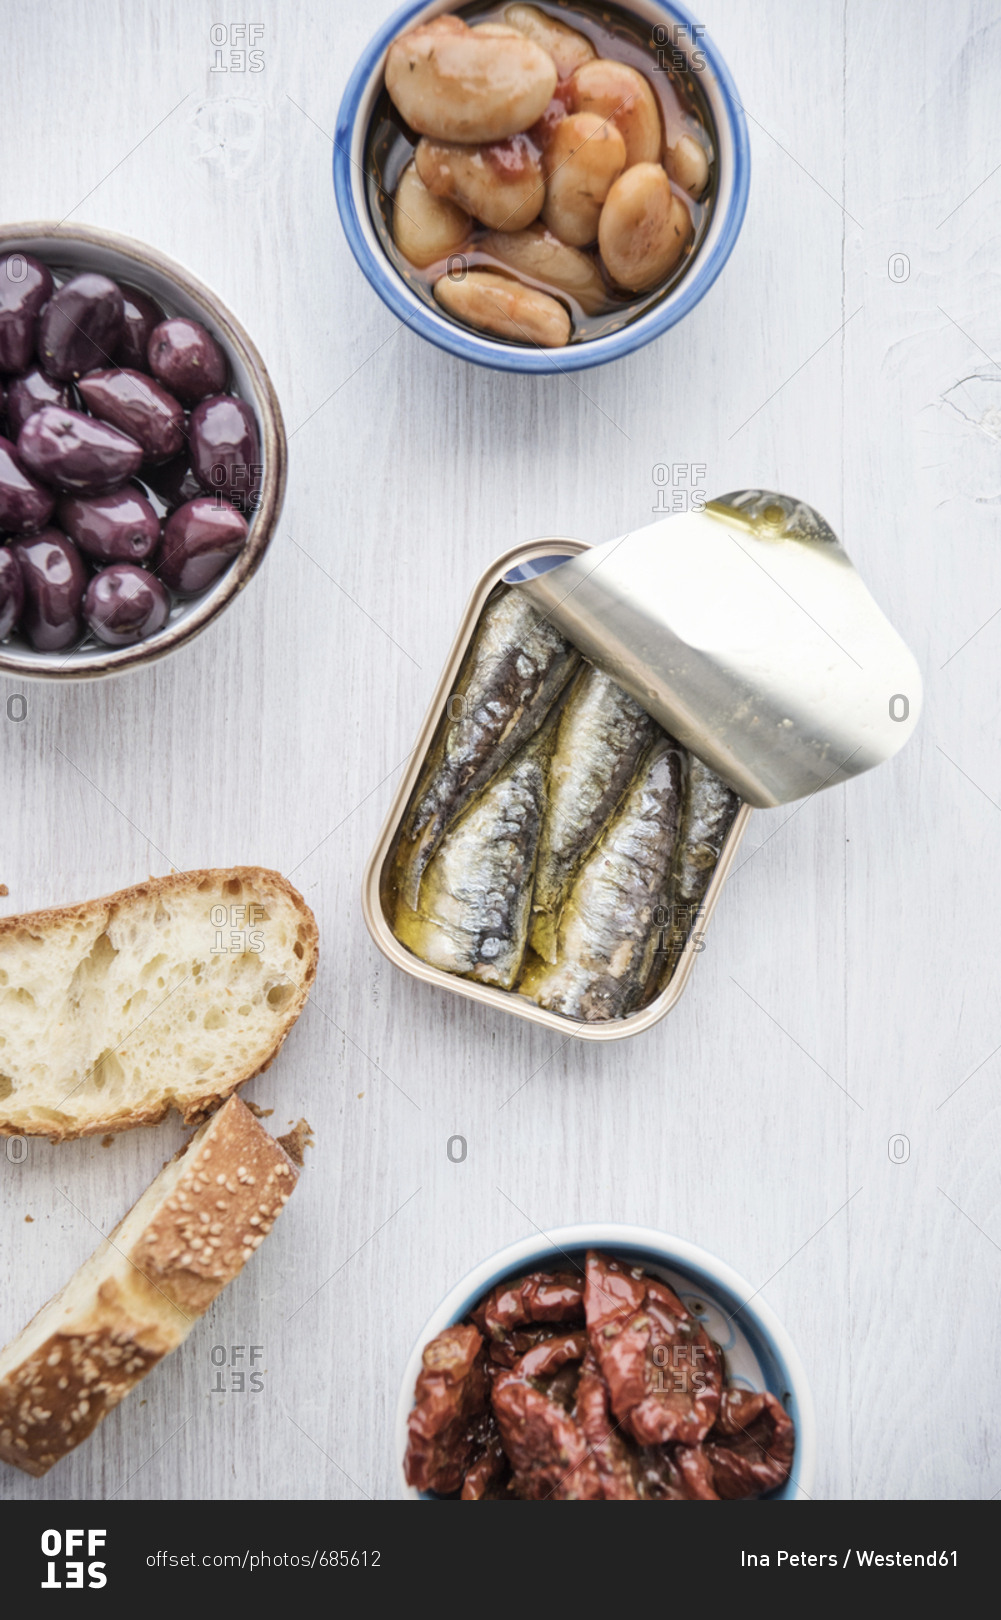 Tin can of sardines in oil- bowls of pickled vegetables and slices of bread